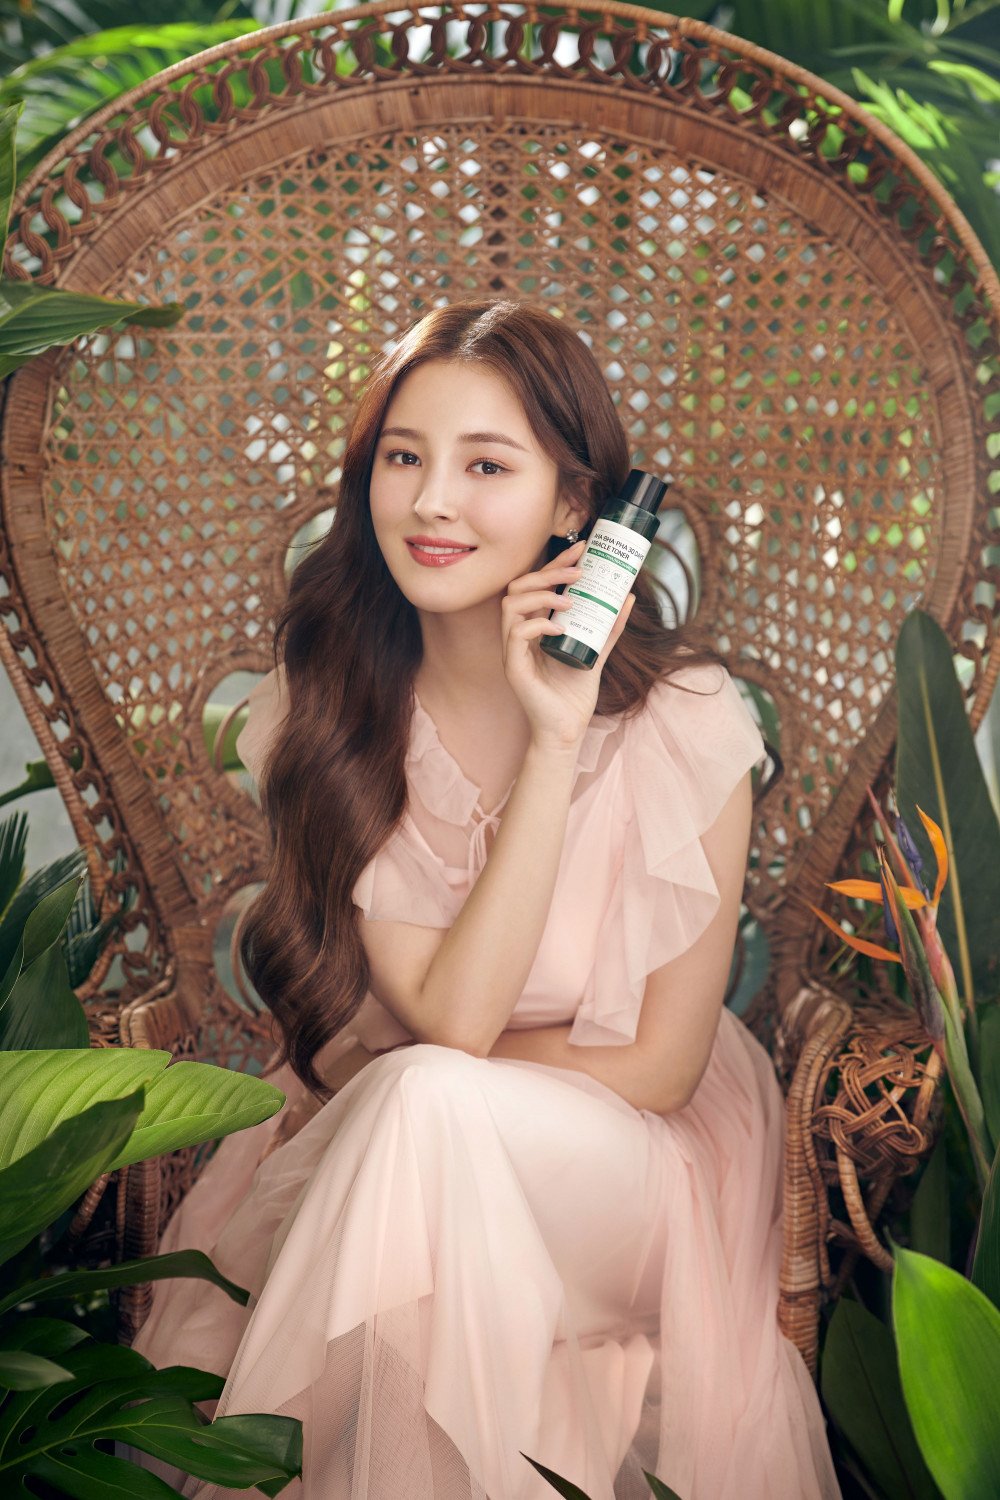 Nancy advertising for Some By Mi